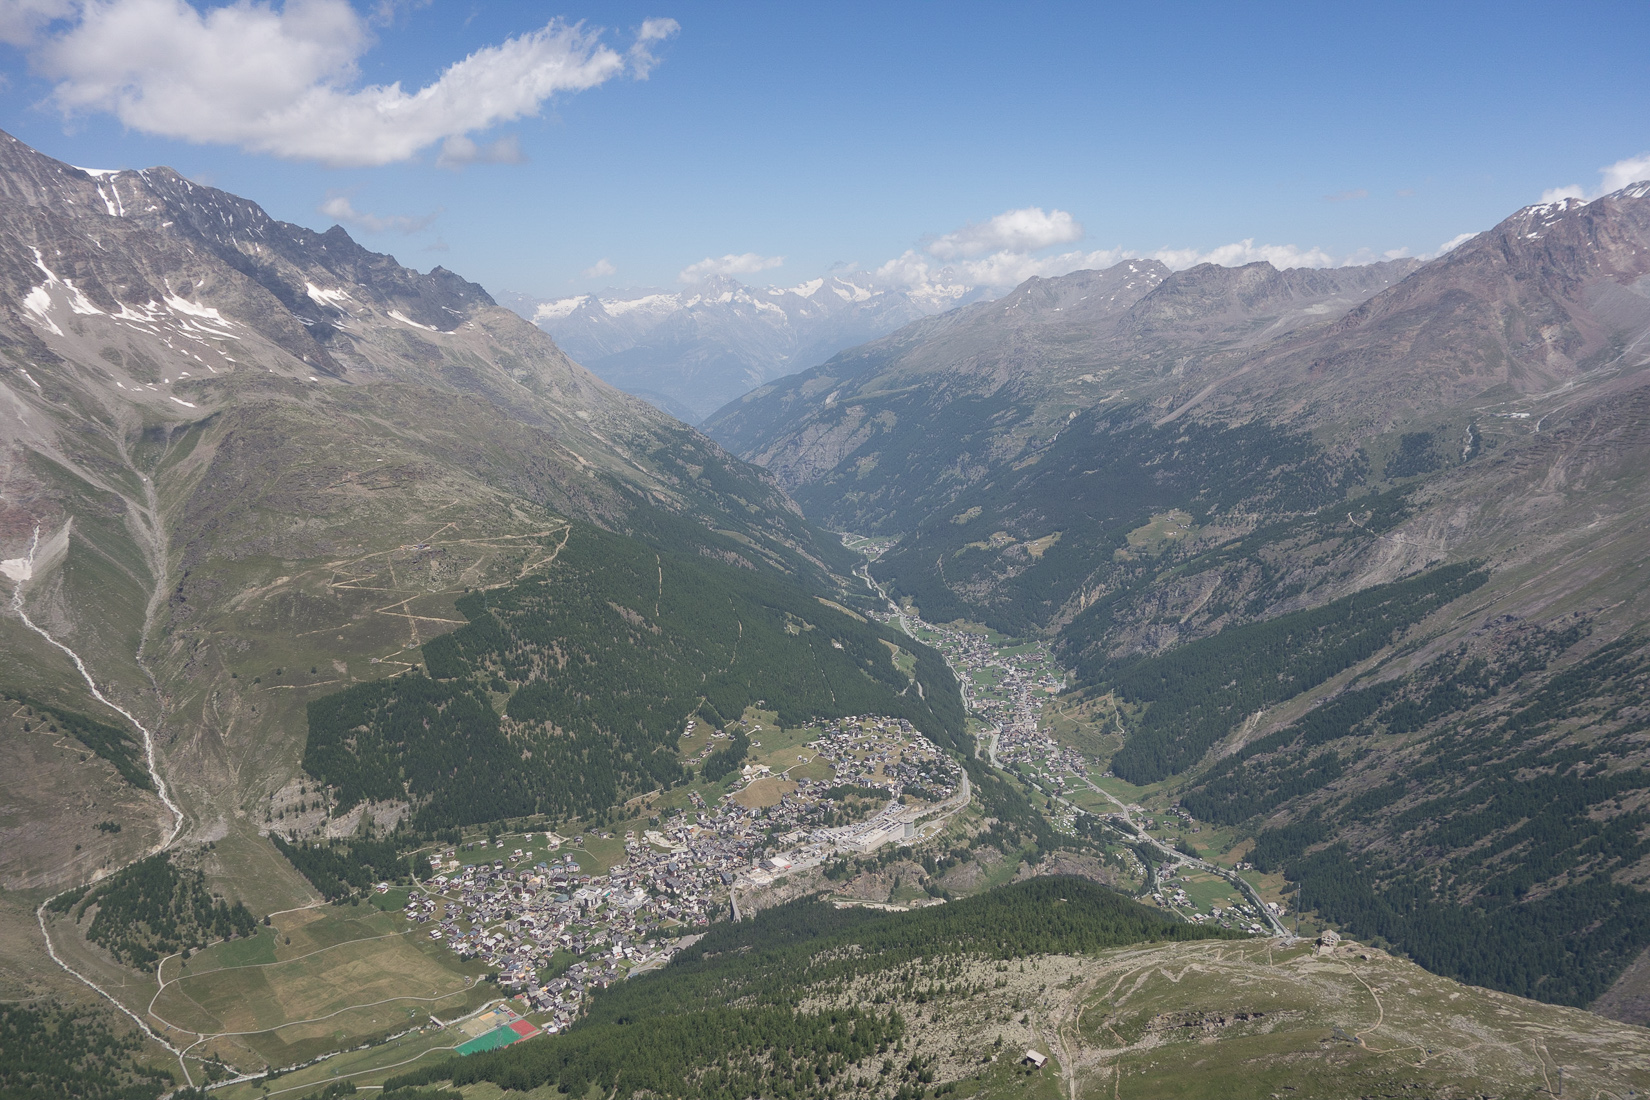 Great view of the Saas Valley